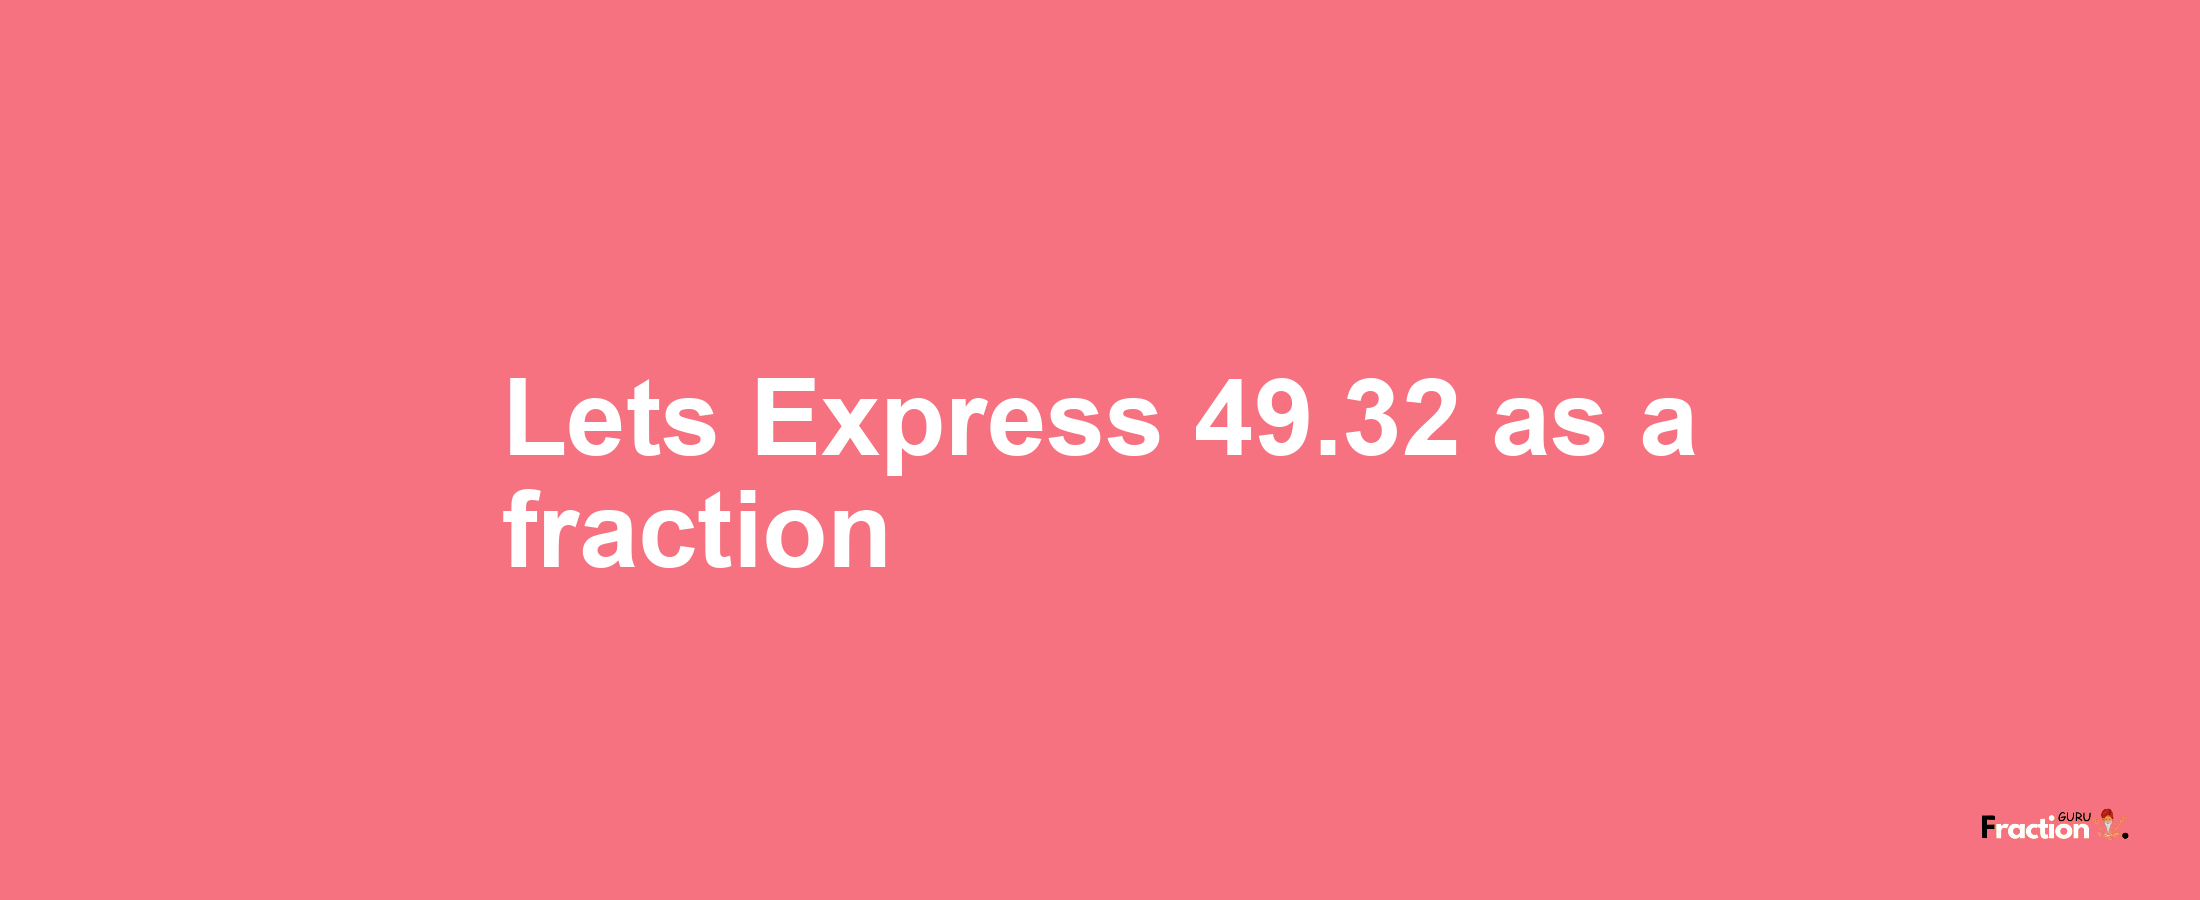 Lets Express 49.32 as afraction